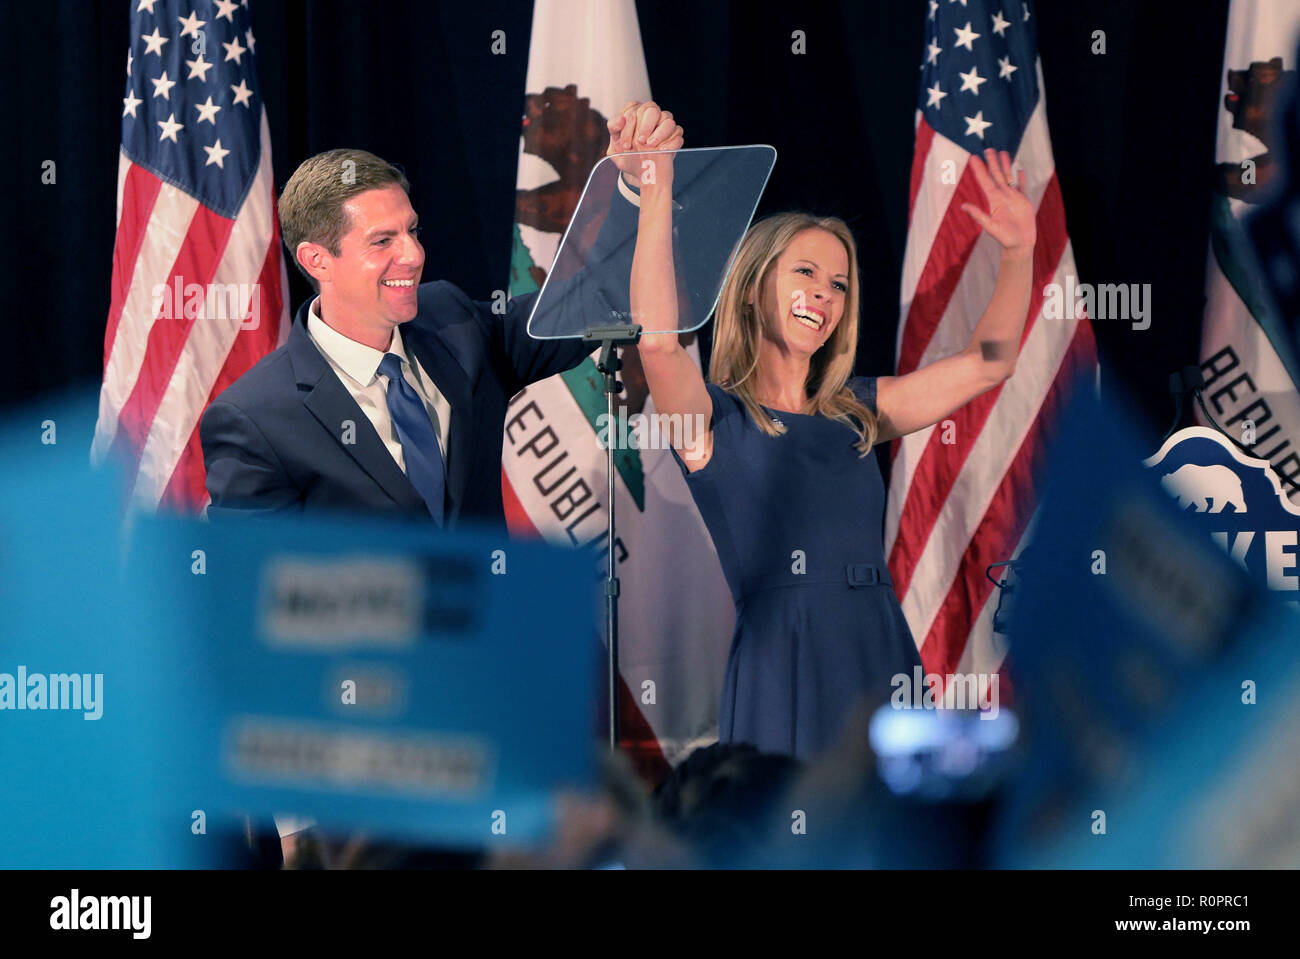 Del Mar, California, USA. 7th Nov, 2018. November 6, 2018 Del Mar, California | Congressional candidate Mike Levin and wife Chrissy greet supporters at the Hilton Hotel in Del Mar, CA. | Photo Credit: Photo by Charlie Neuman Credit: Charlie Neuman/ZUMA Wire/Alamy Live News Stock Photo